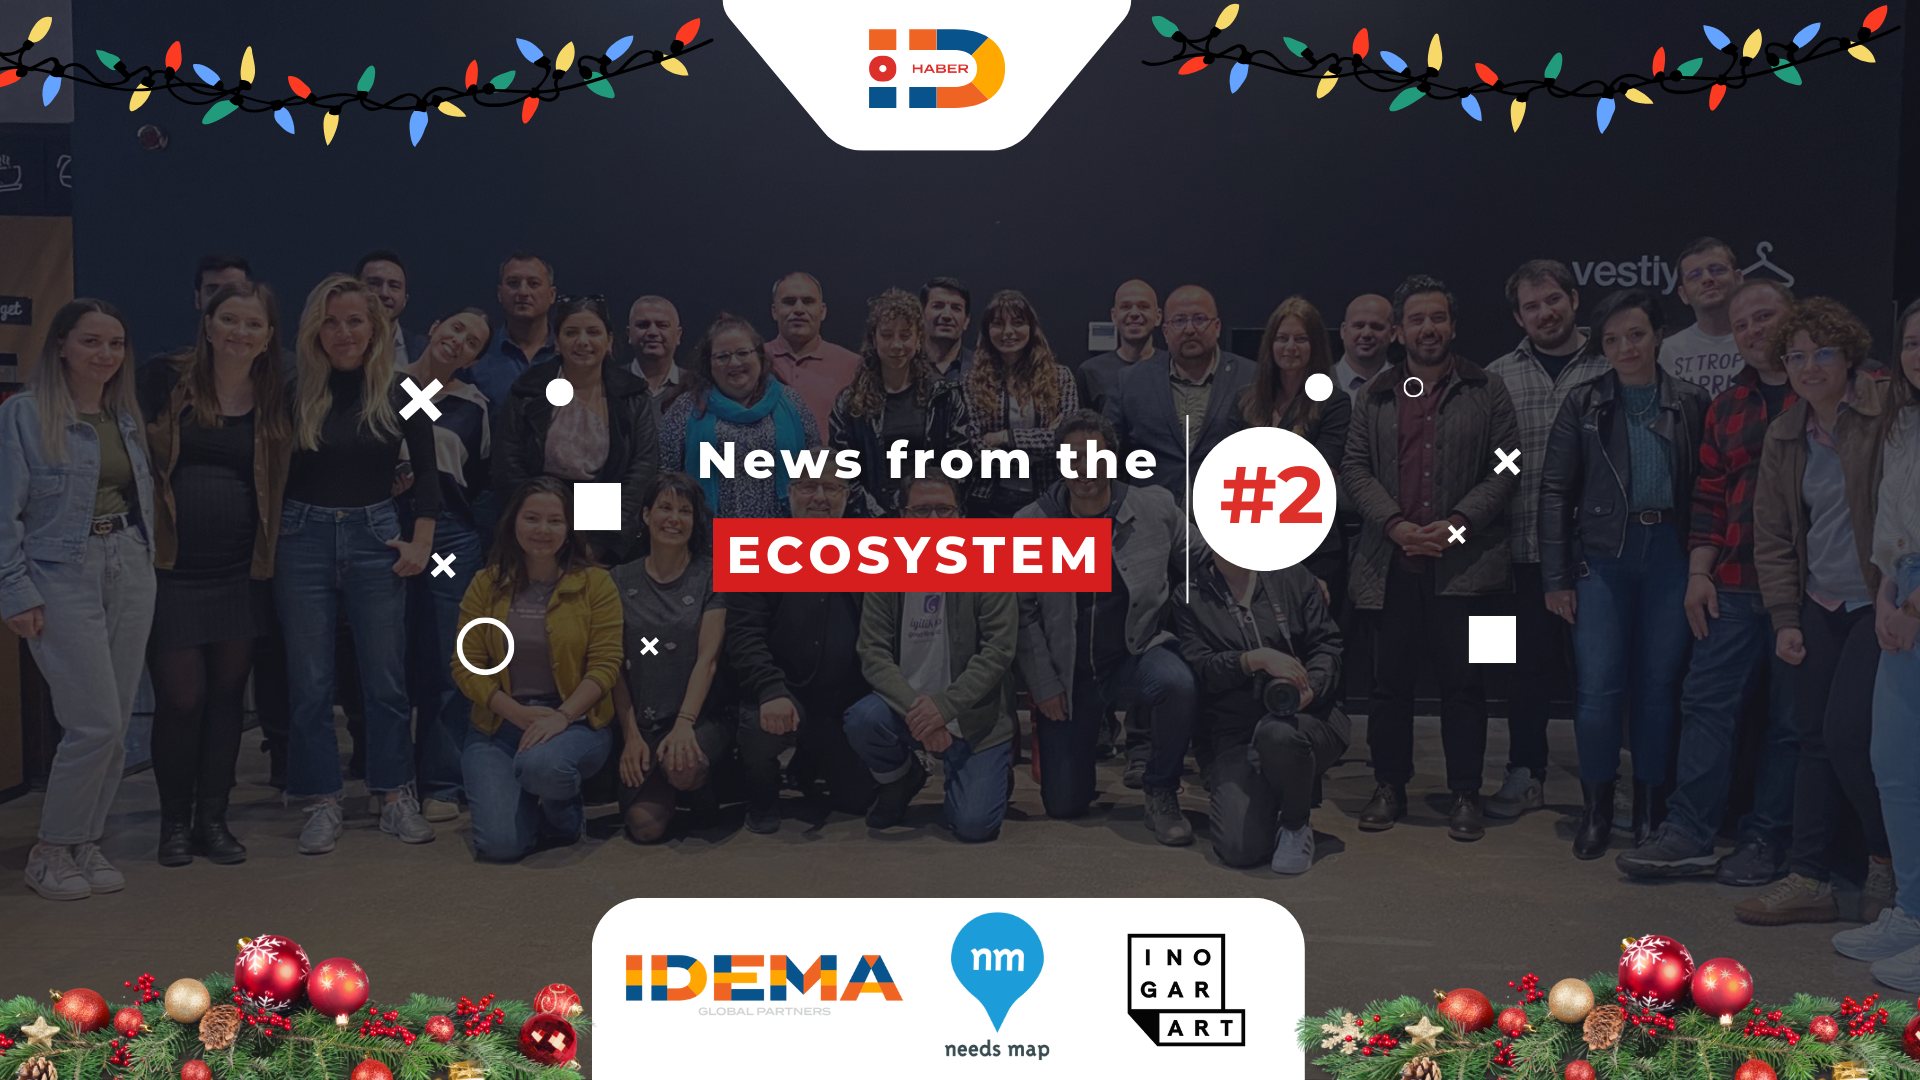 News from the Ecosystem #2 is out!